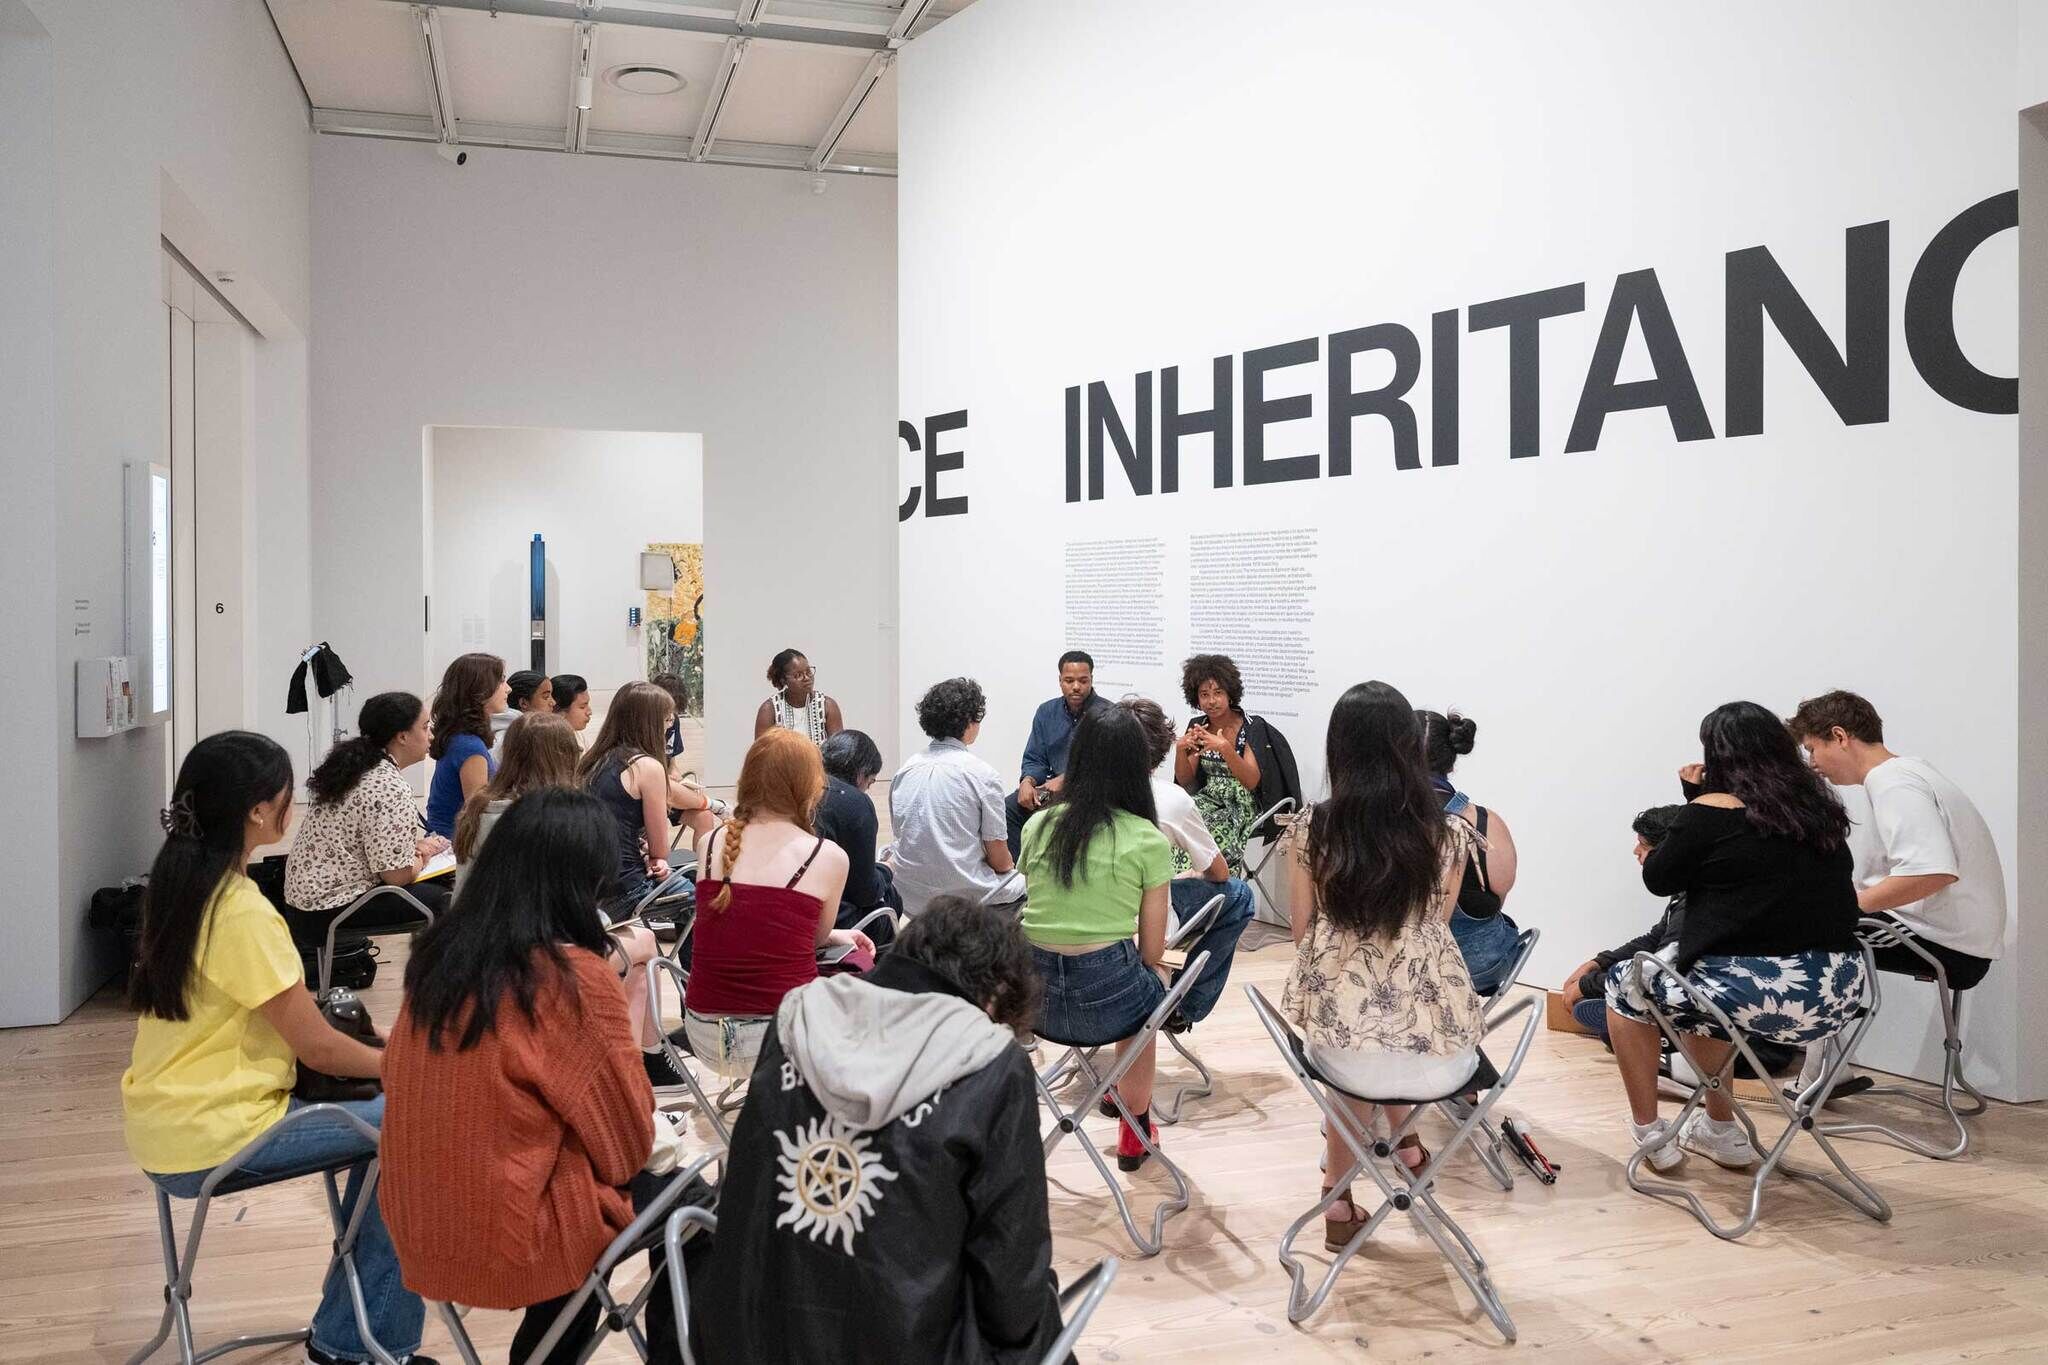 A bunch of youths sitting on chairs listening to two adults in front of a wall with text that says "Inheritance."